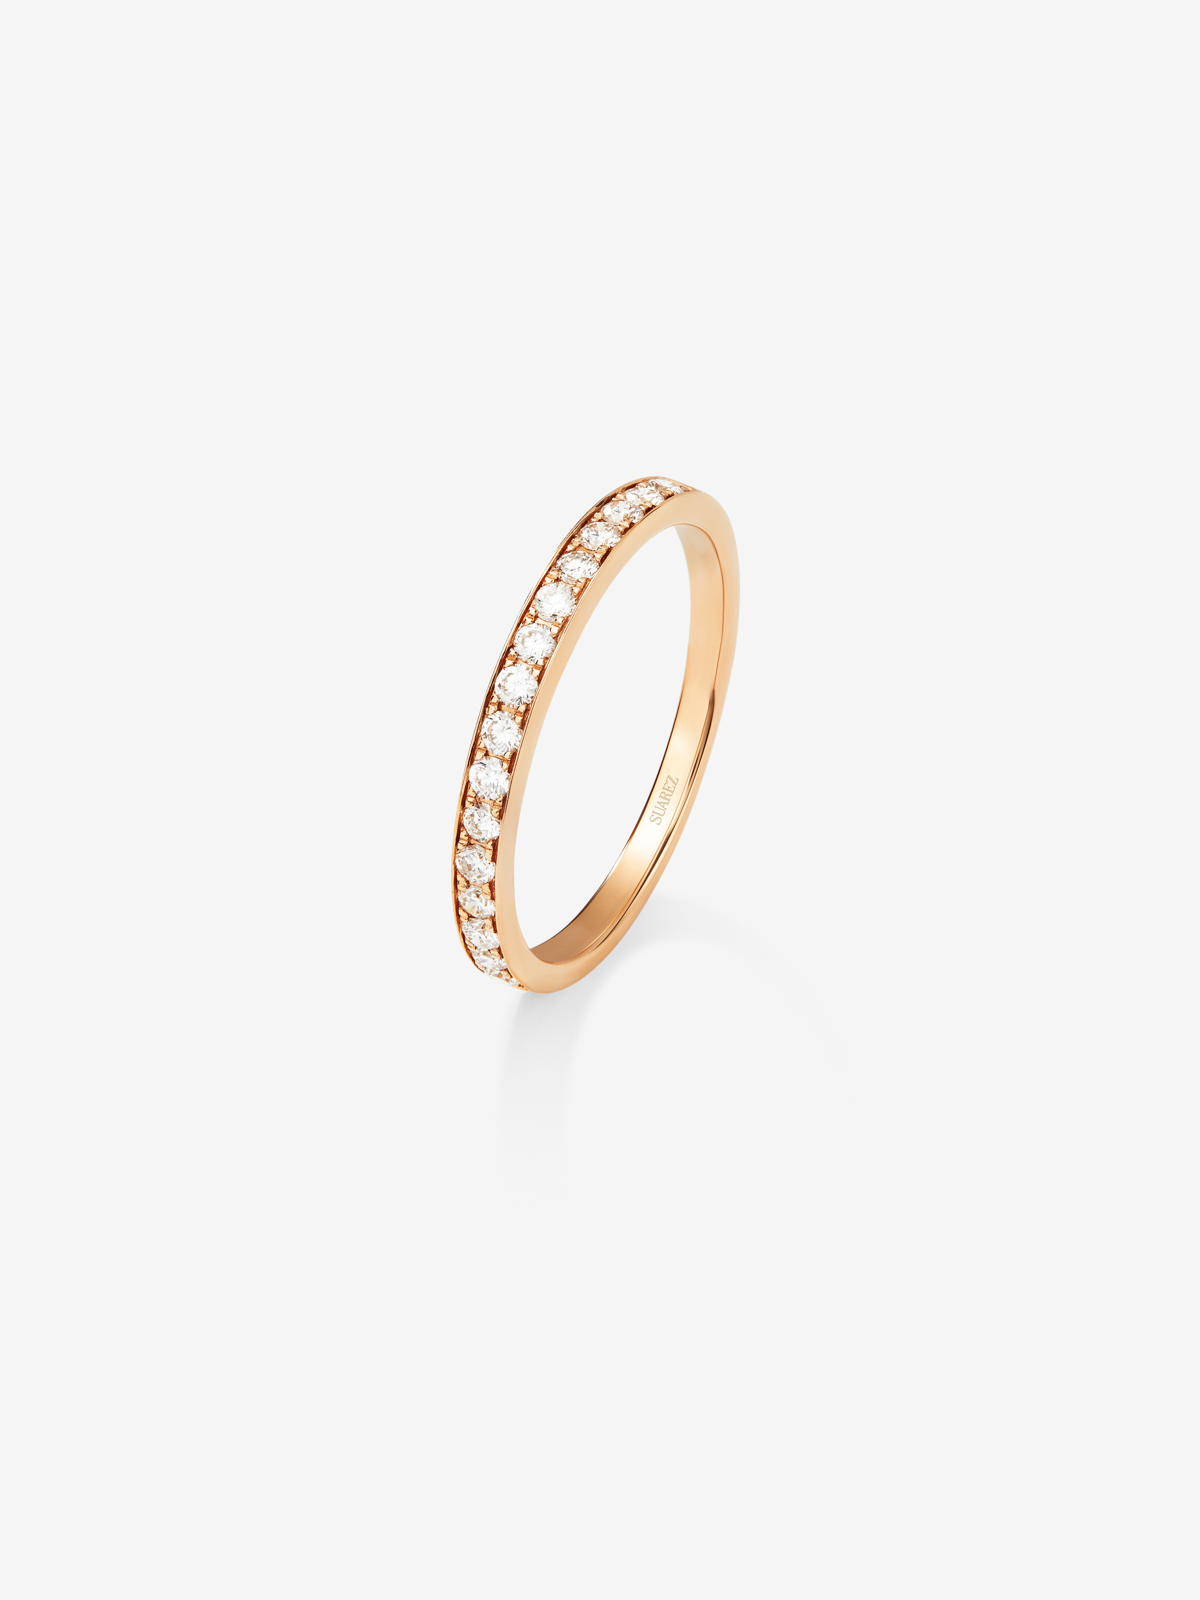 18K rose gold compromise alliance with diamonds